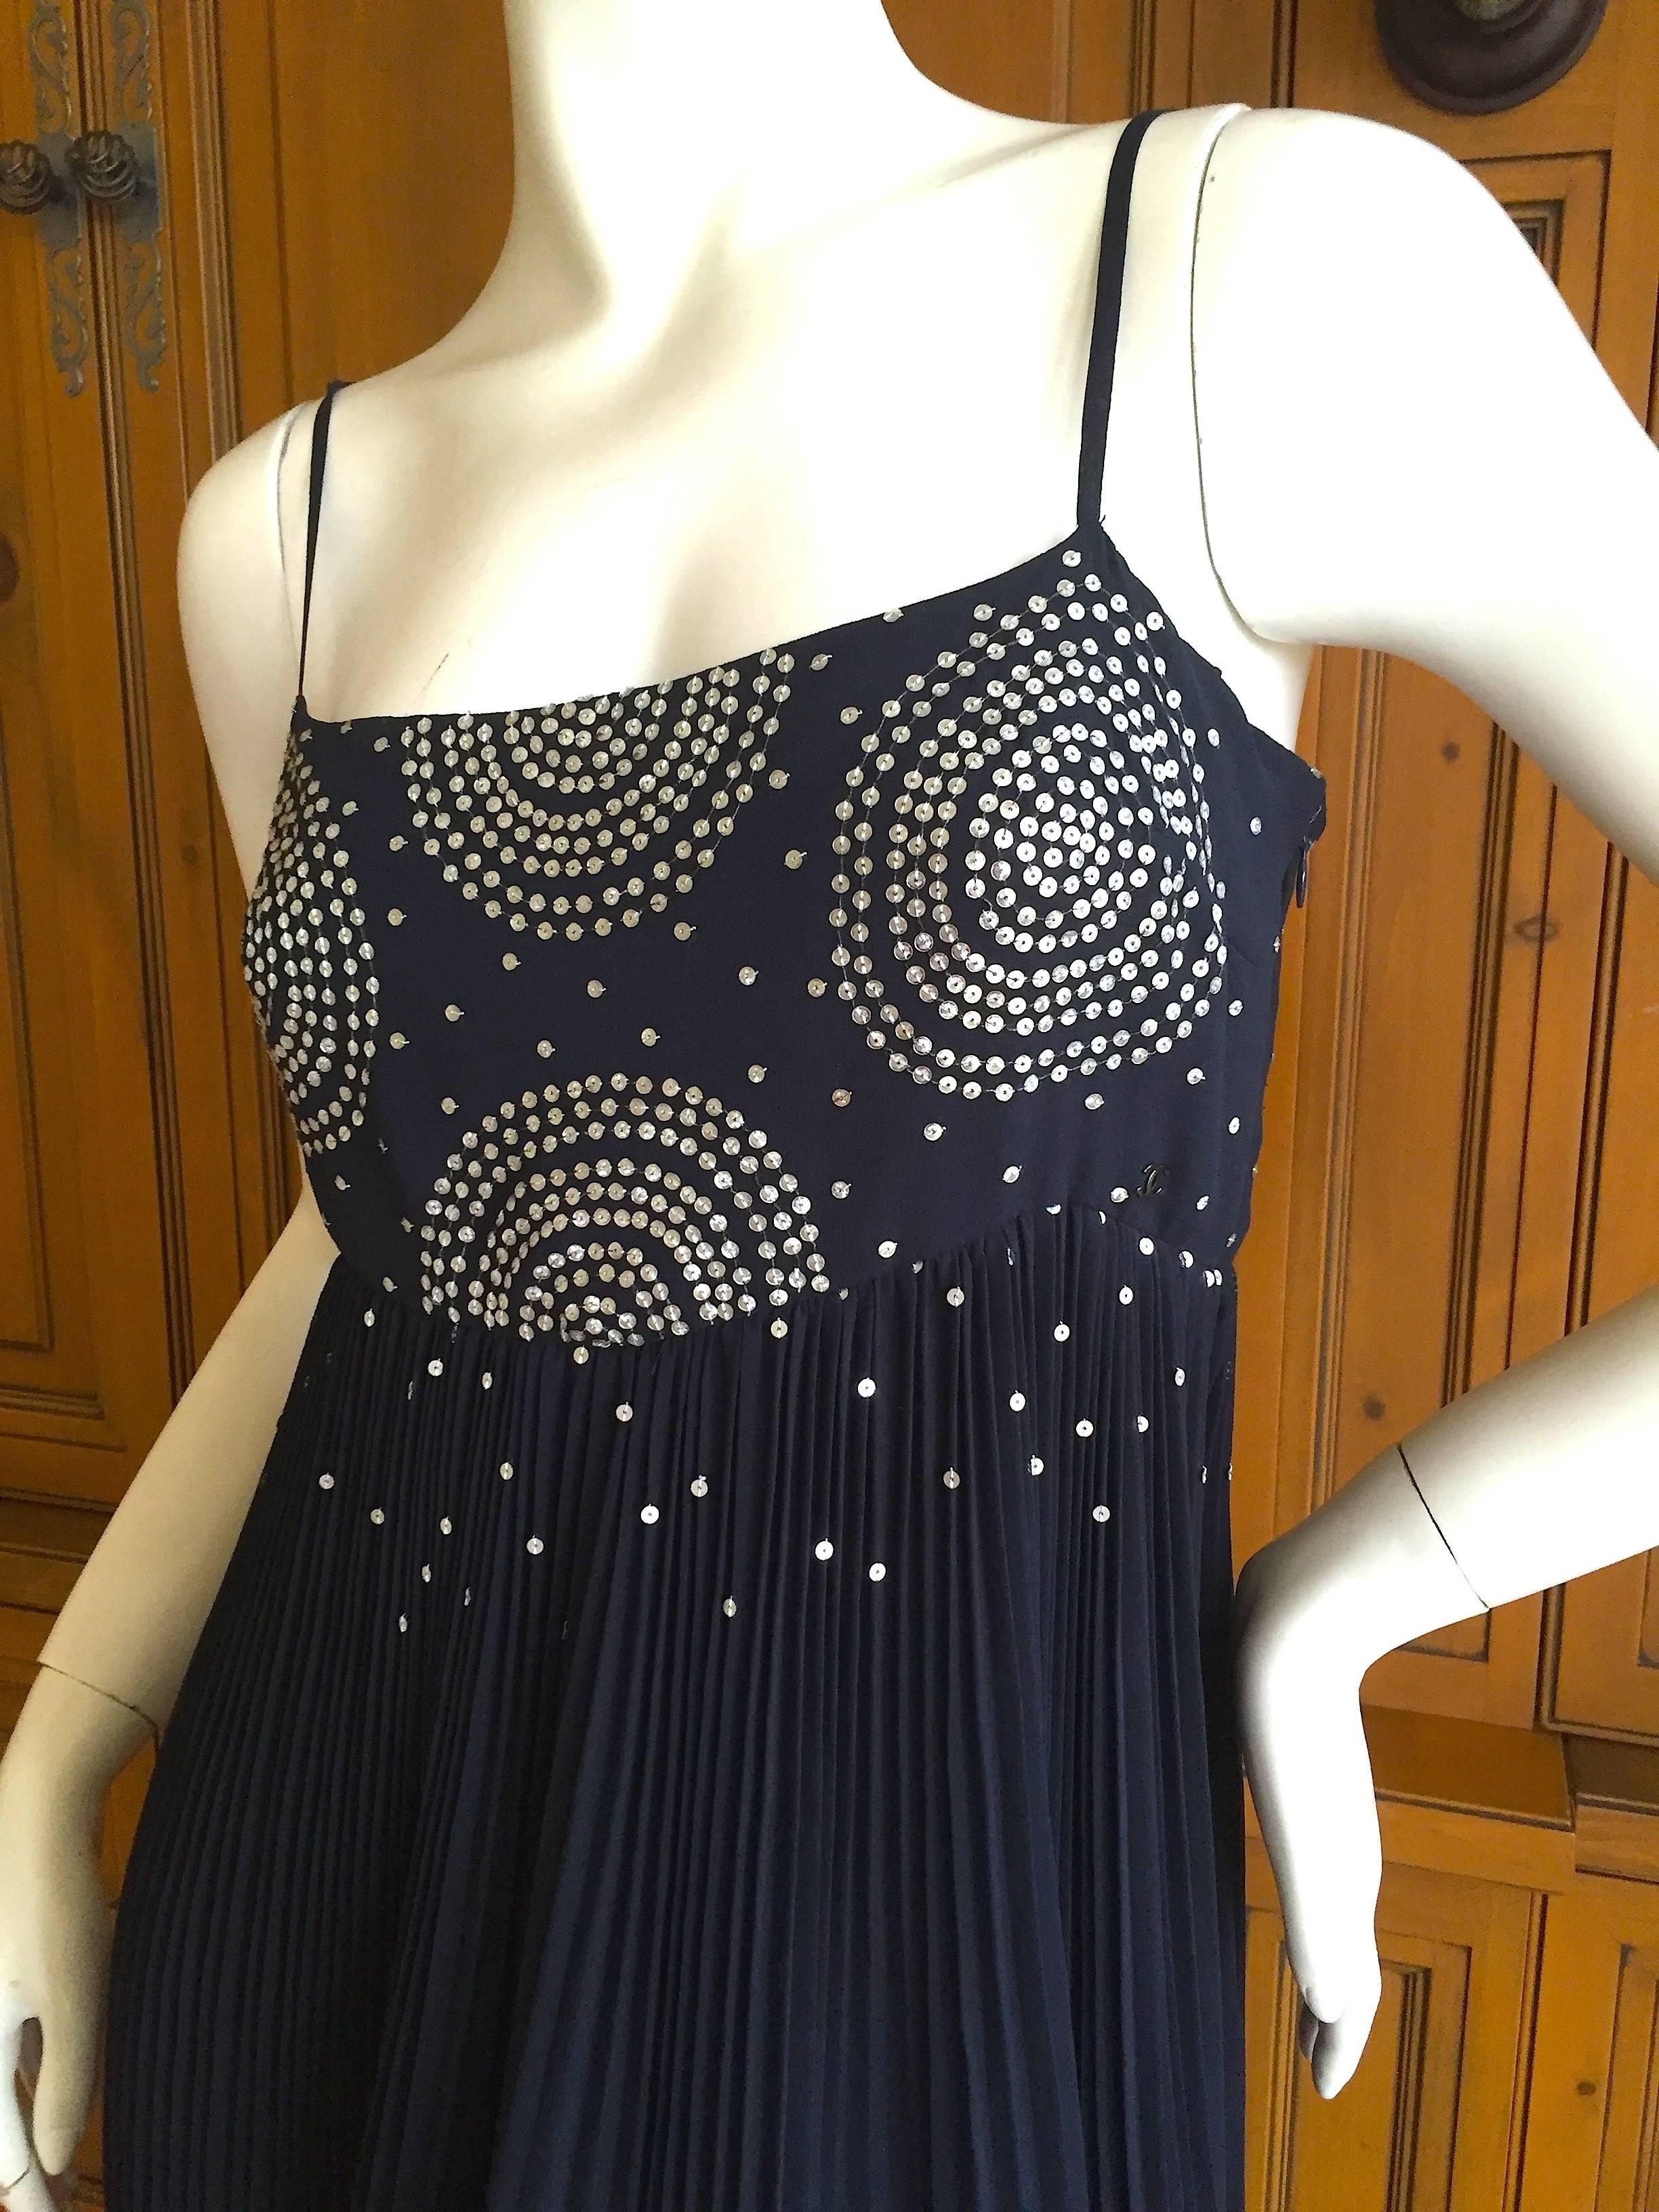 Women's Chanel Navy Blue Dress with Silver Sequin Embellishment